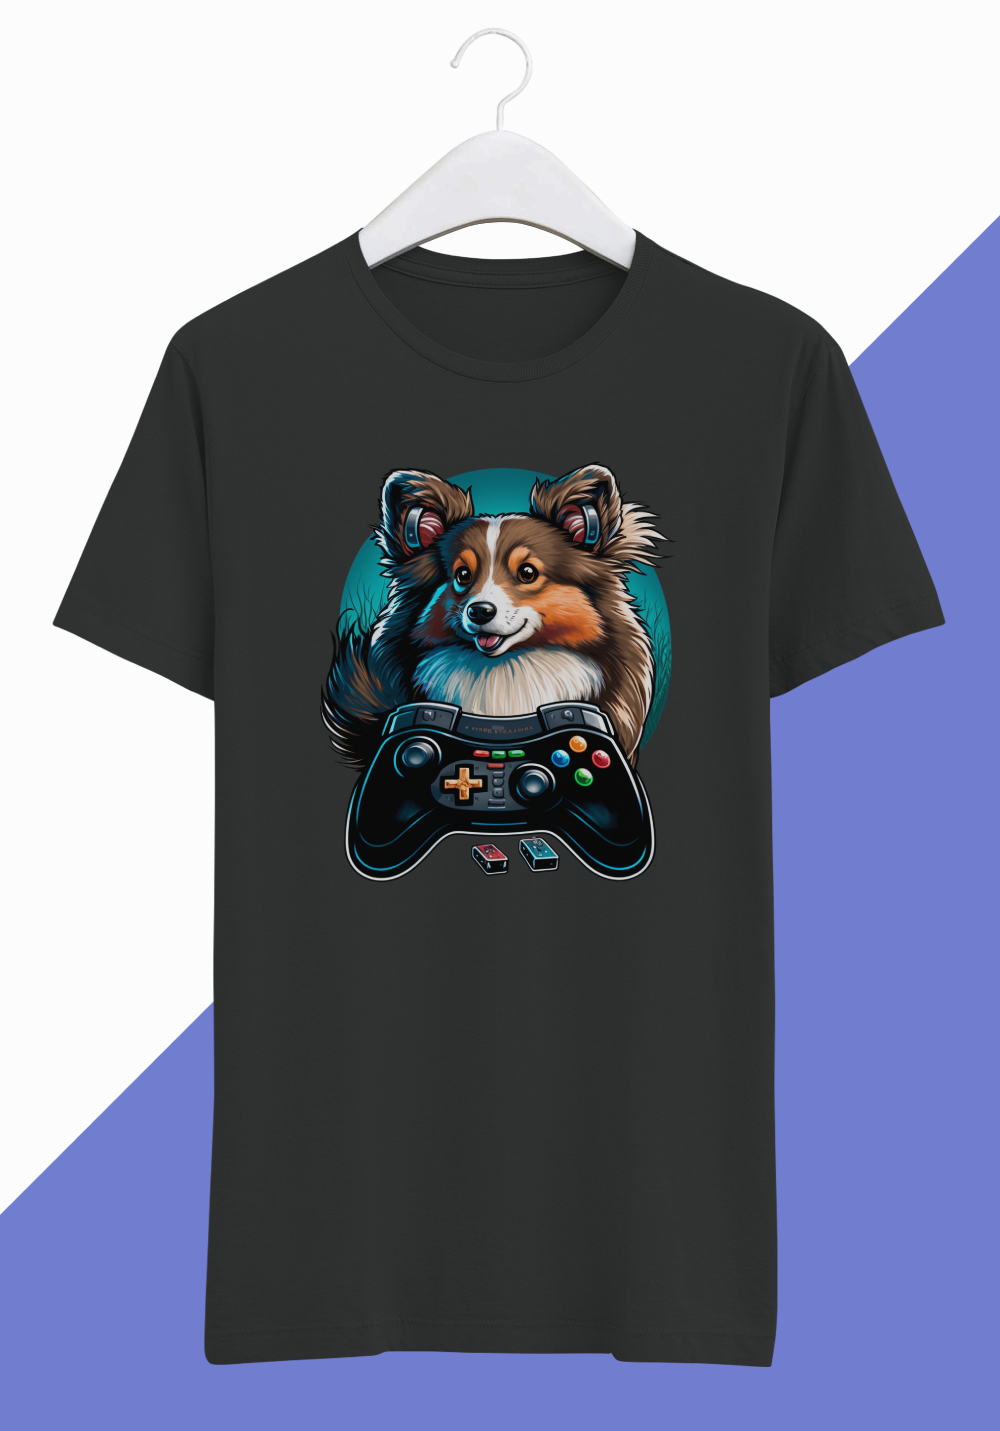 short-sleeve-black-t-shirt-for-men-retro-dog-with-a-game-controller